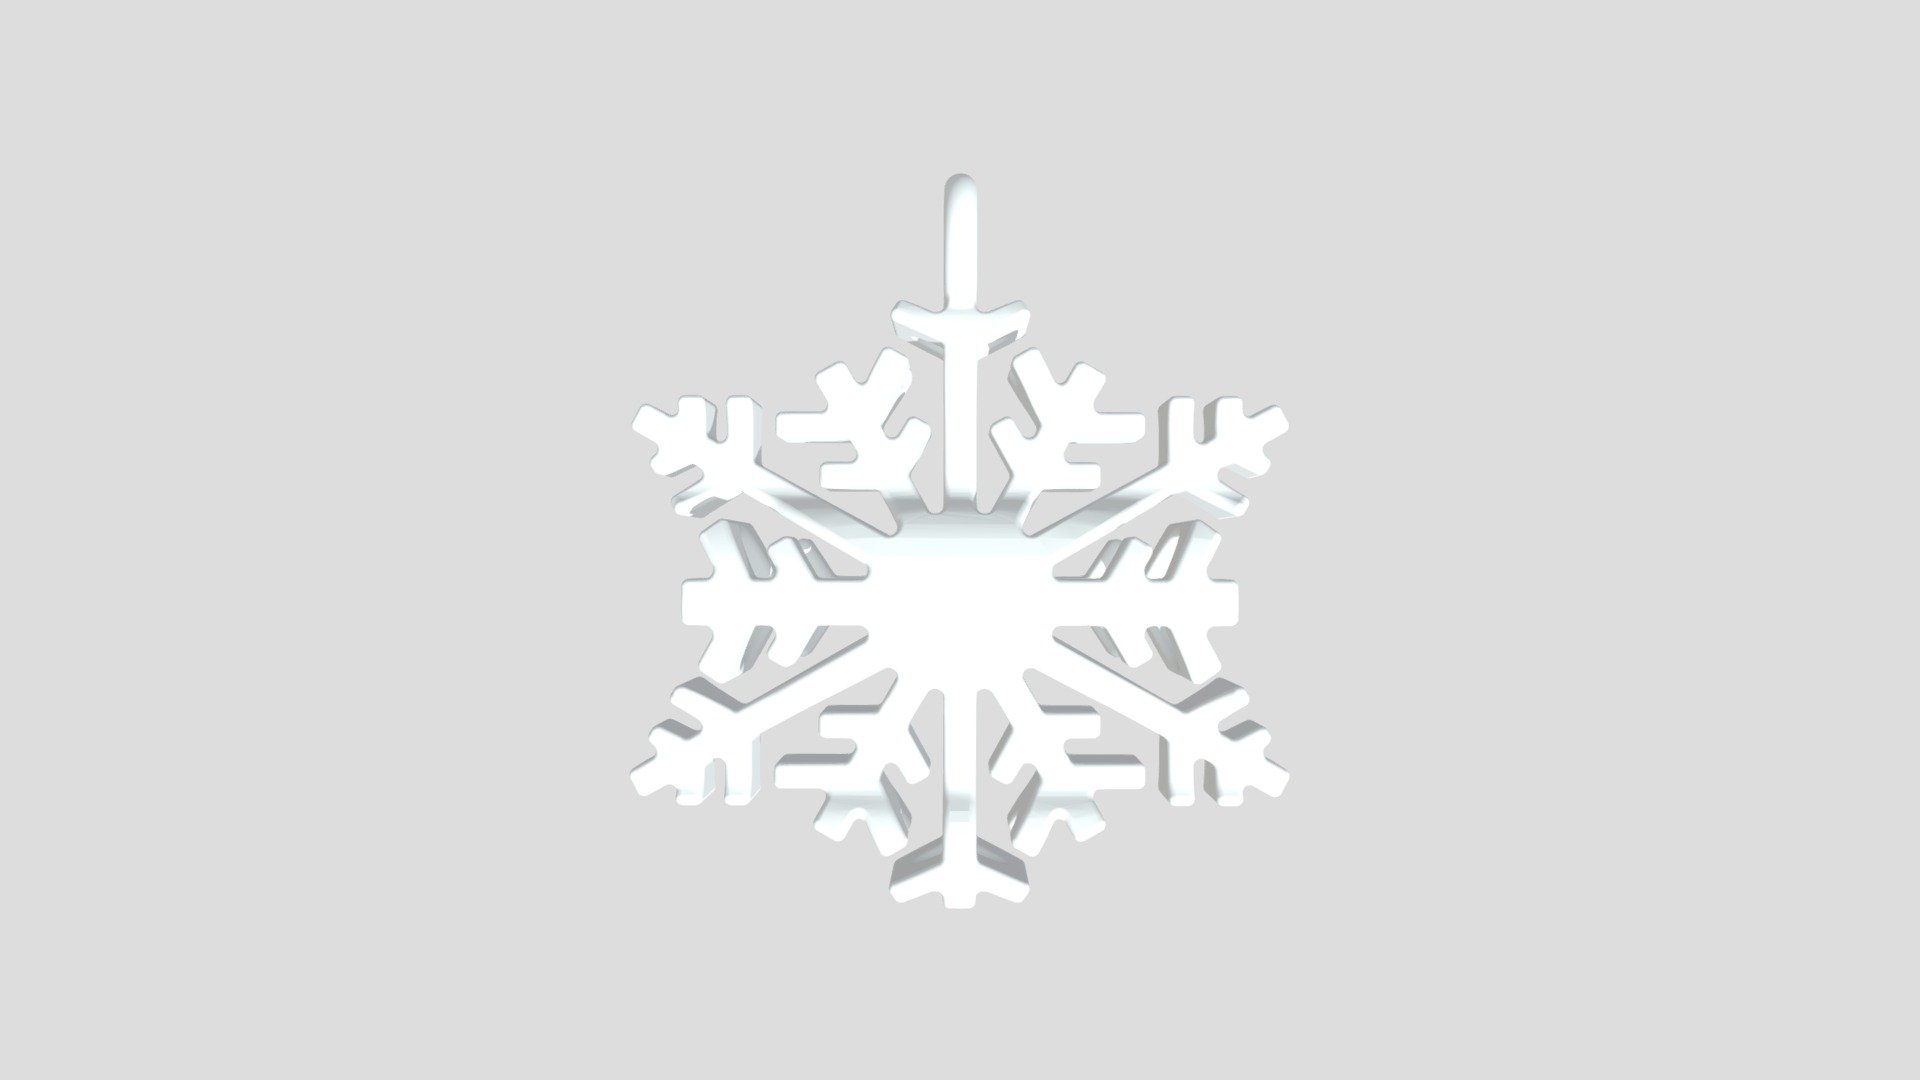 This design was to create a jagged-looking pendant which doesn't snag on skin or clothing; the final result was a frontal profile of a classical symmetric snowflake, yet with a rounded and smoothed side profile preventing any discomfort.

It features a 4mm diameter hole at the top of the design for convenient attachment to a necklace directly or the use of a split ring instead.

My personal reccomendation for this design would be having it made with antique silver for extra intruigue, although if it's something you want to be extra special, 14k white gold would be one of the most extravagant &amp; elegant options for such a pendant 3d model